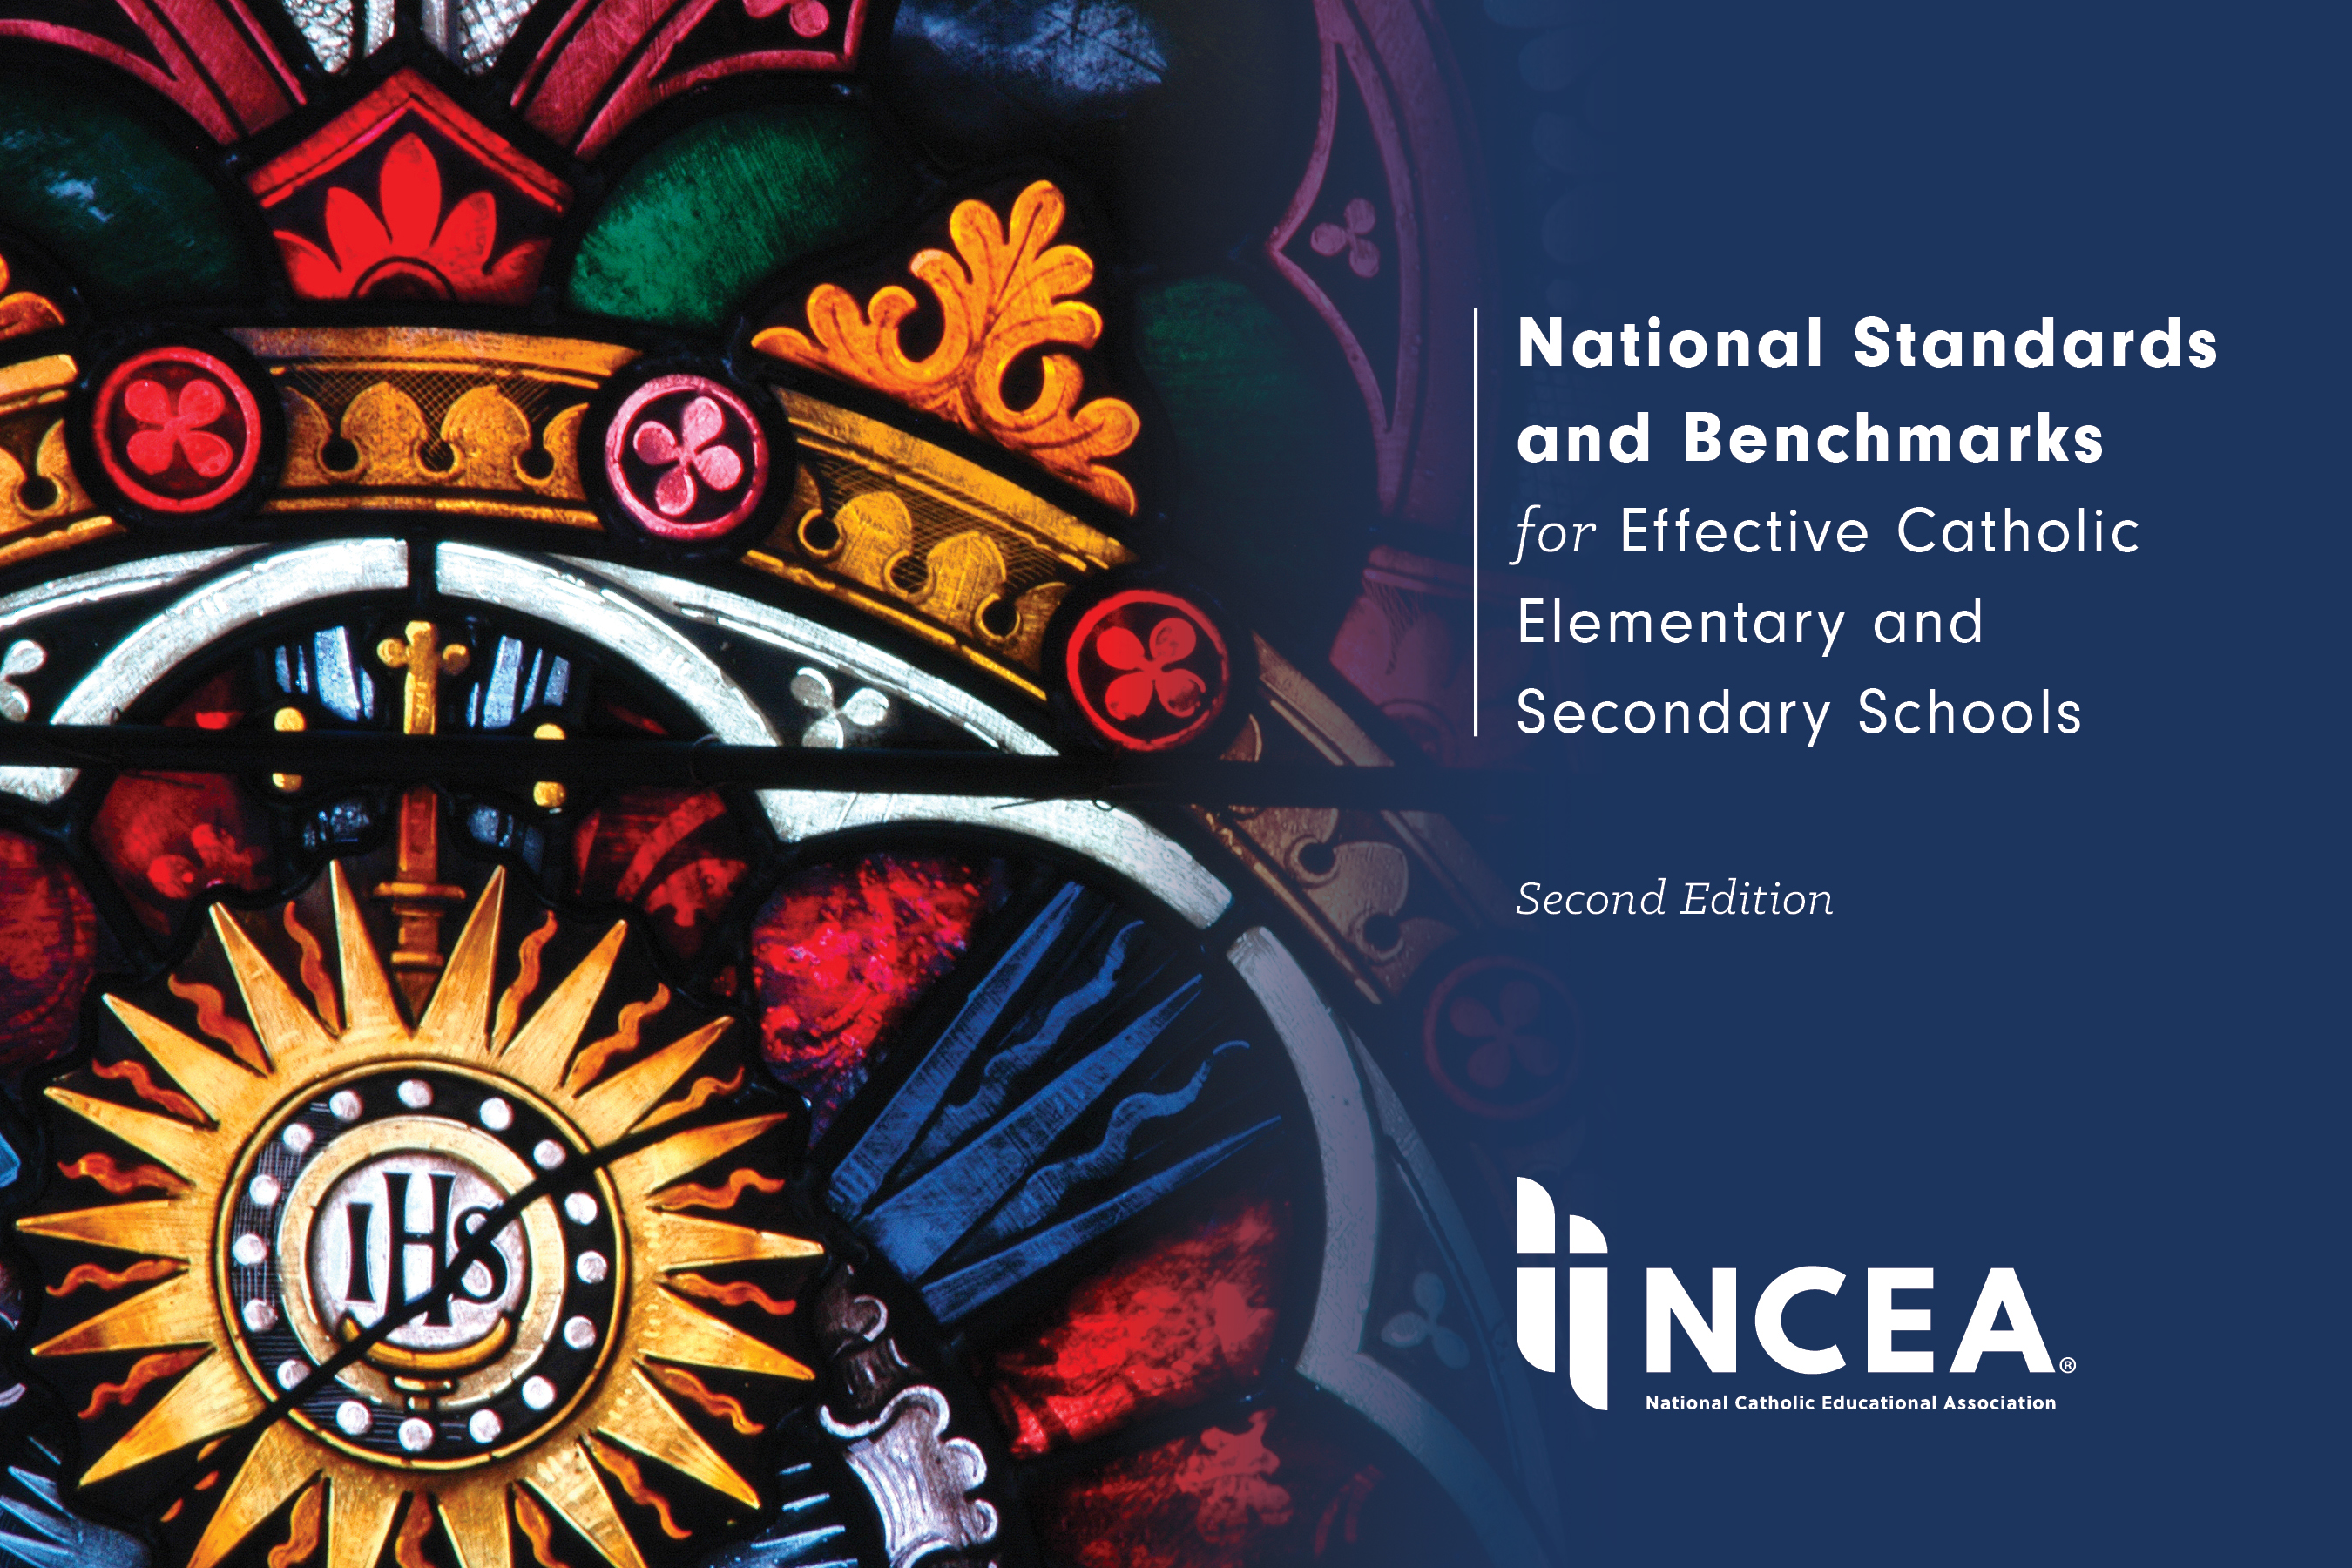 Downloadable PDF of The National Standards and Benchmarks